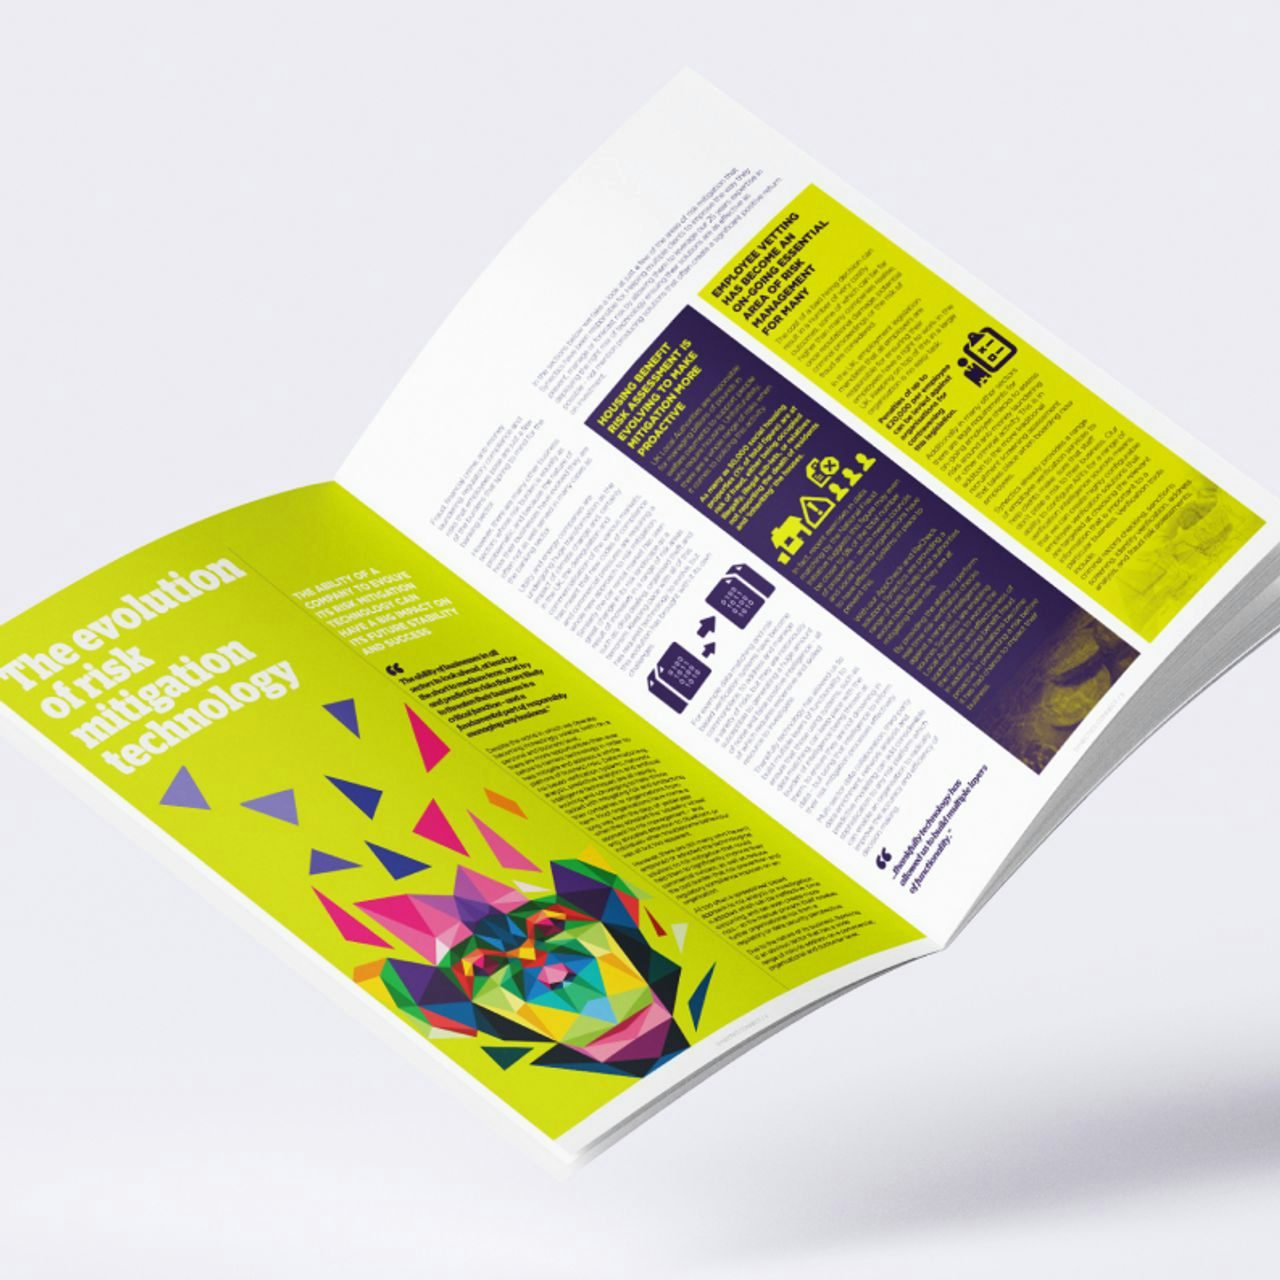 'CONNECT' spread discussing 'The evolution of risk mitigation technology', with one page featuring a bold lime green title and vibrant yellow and purple backgrounds. The other page includes a colorful geometric low-poly image of a primate and text columns.